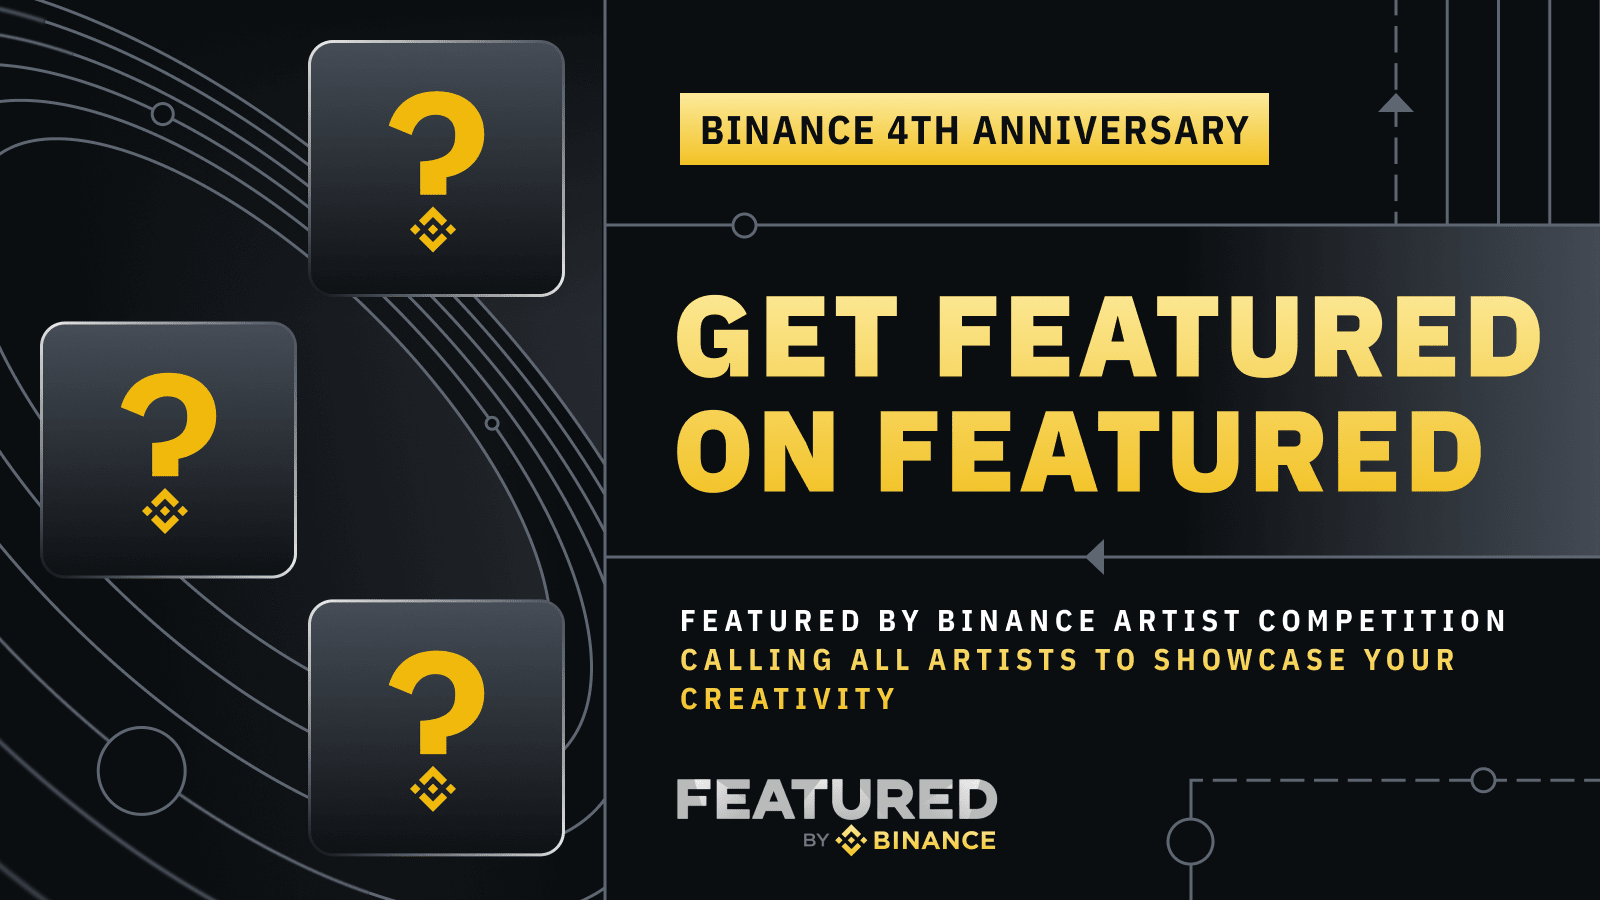 Get Your NFT Artwork “Featured by Binance”: Call For Submissions